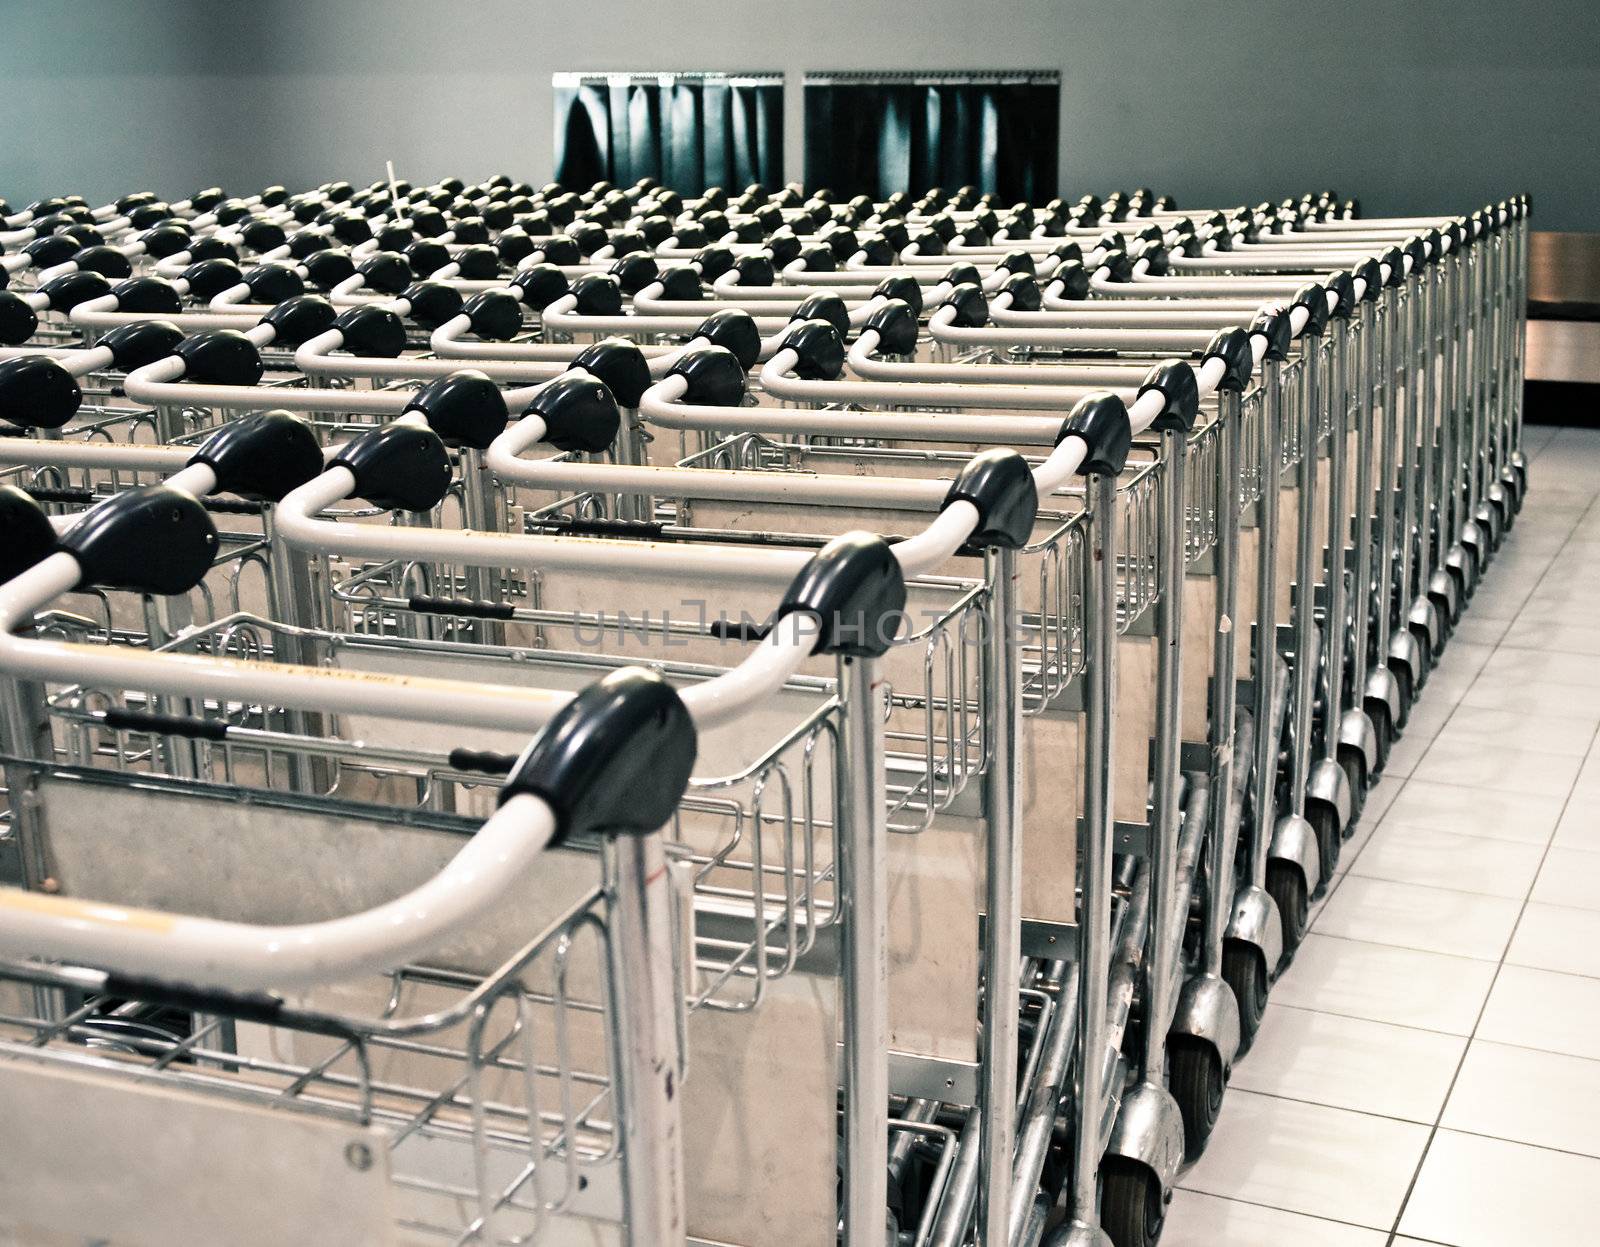 Row of baggage trolleys at an airport